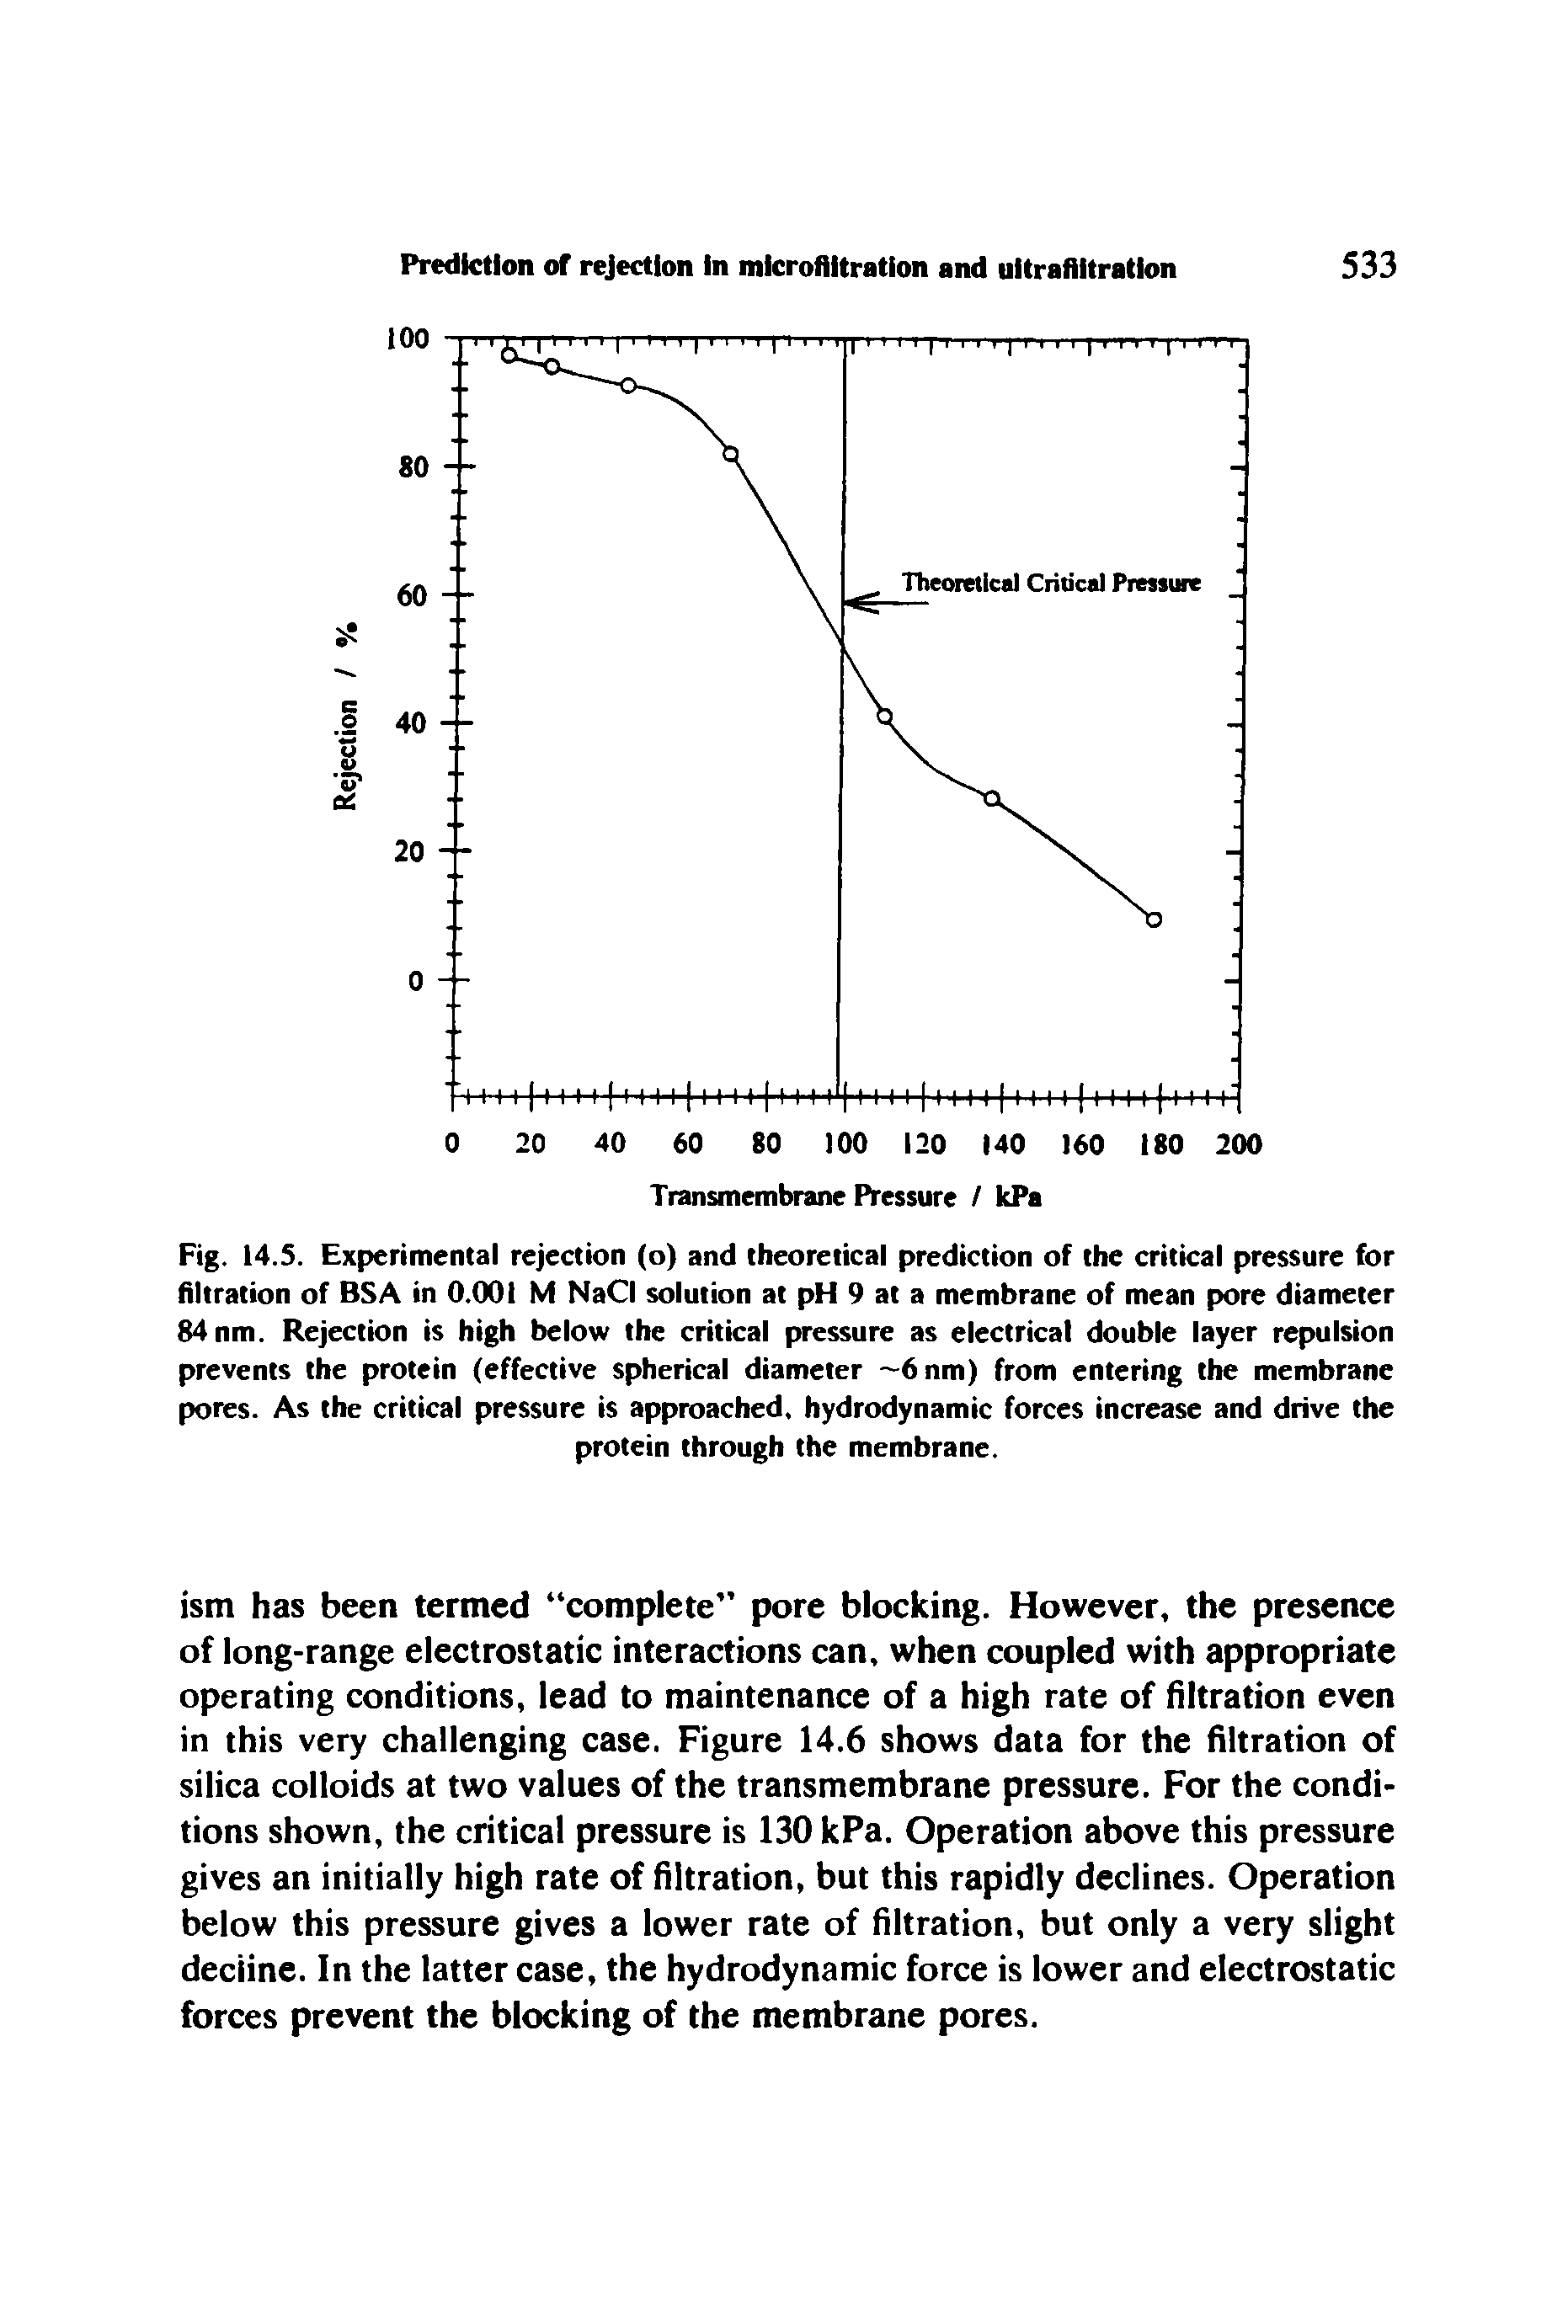 Fig. 14.5. Experimental rejection (o) and theoretical prediction of the critical pressure for filtration of BSA in 0.001 M NaCI solution at pH 9 at a membrane of mean pore diameter 84 nm. Rejection is high below the critical pressure as electrical double layer repulsion prevents the protein (effective spherical diameter 6nm) from entering the membrane pores. As the critical pressure is approached, hydrodynamic forces increase and drive the...